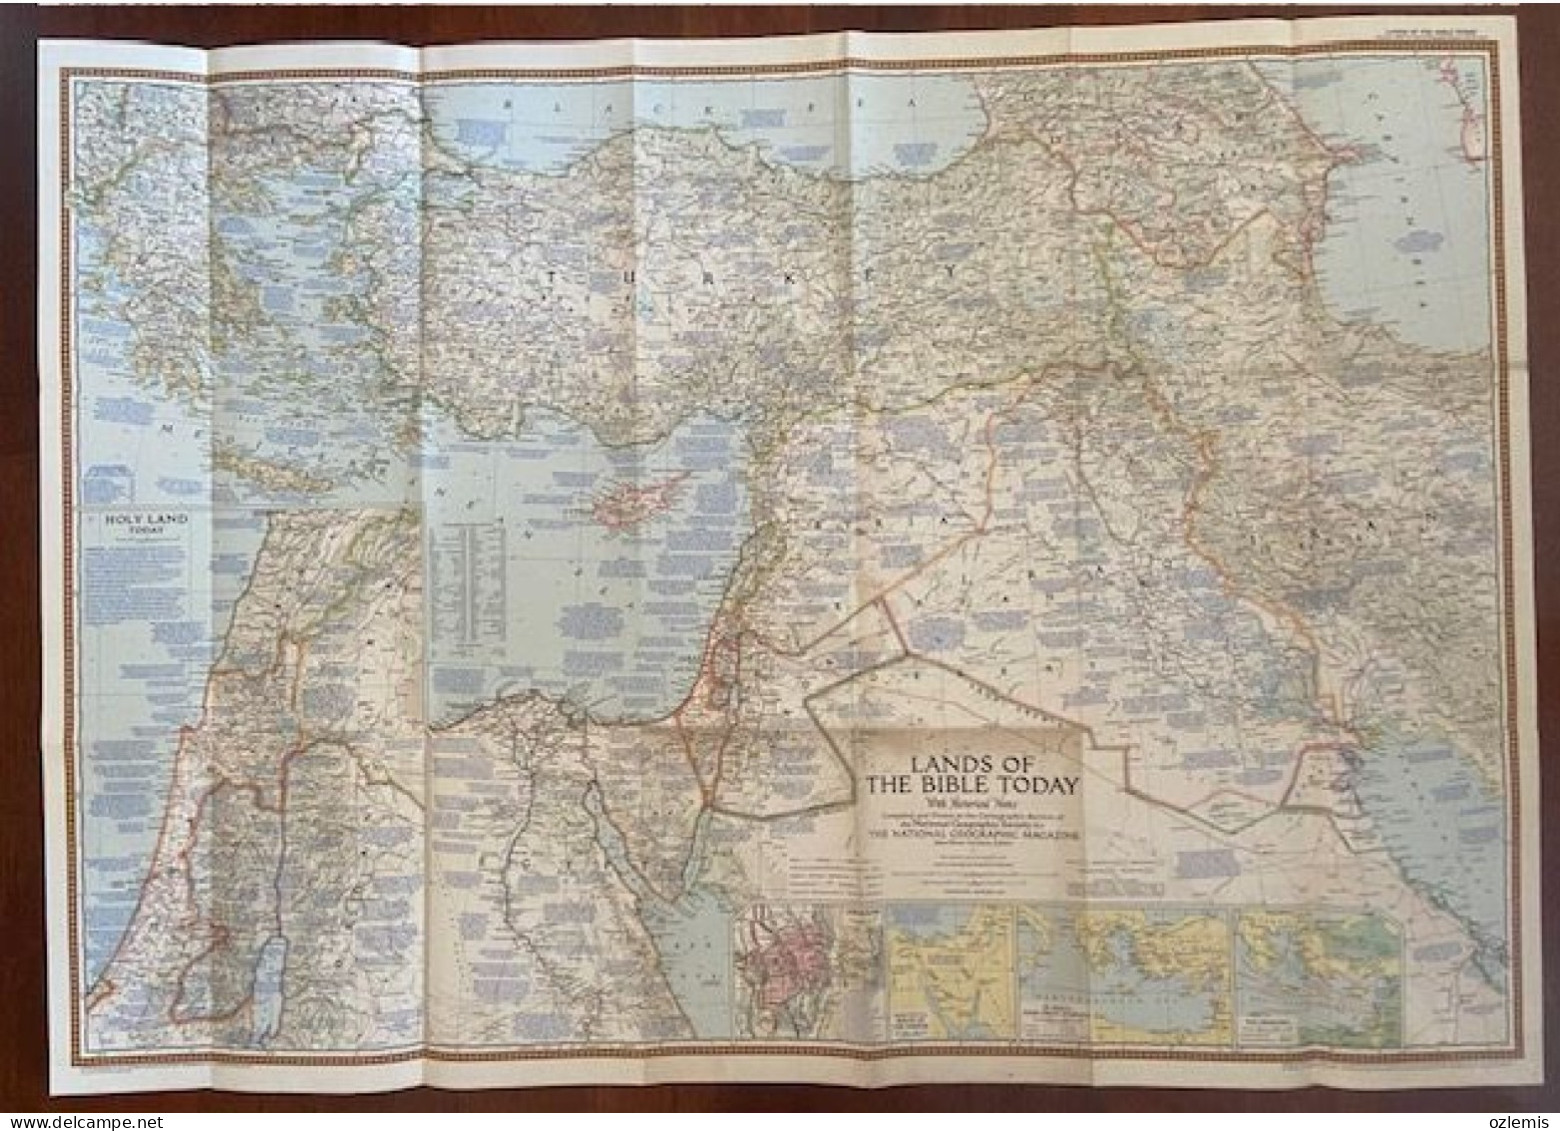 LANDS OF THE BIBLE TODAY WITH HISTORICAL NOTES ,THE NATIONAL GEOGRAPHIC MAGAZINE ,1956 ,MAP - Atlanten